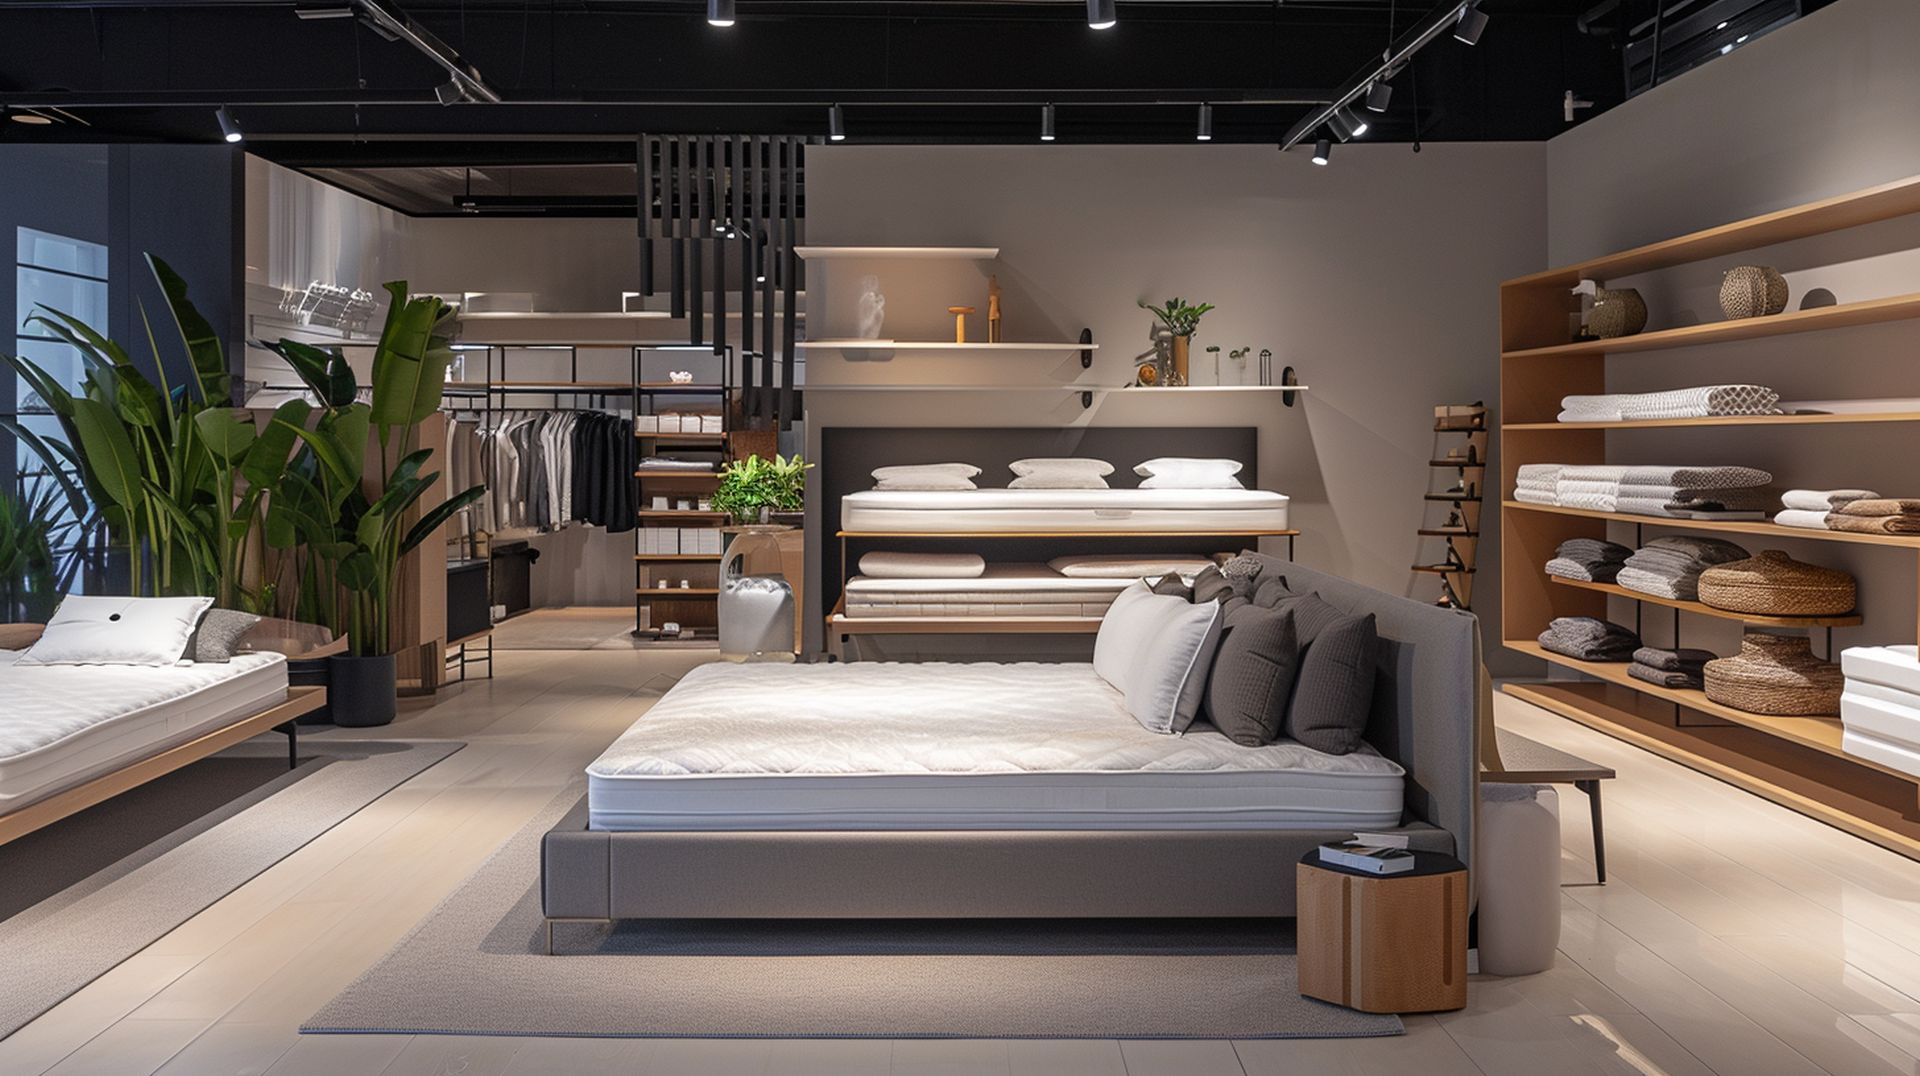 If you're looking for a new bed, mattress stores in Everett offer the best customer and delivery service, financing, and warranties in Washington